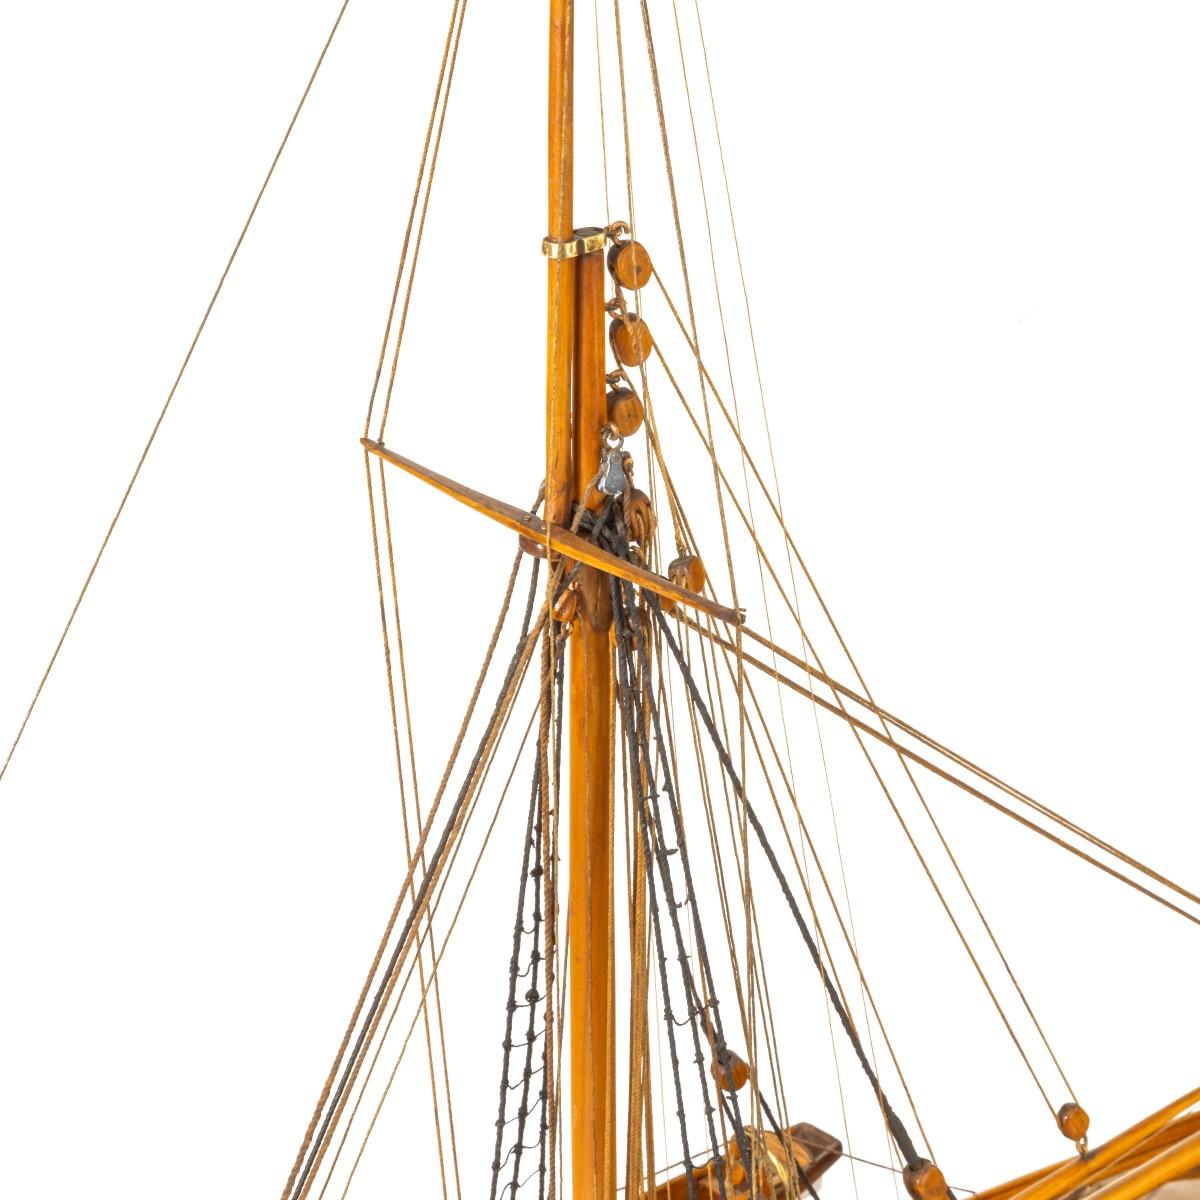 Shipyard Model of a Gaff-Rigged Newhaven Smack 5